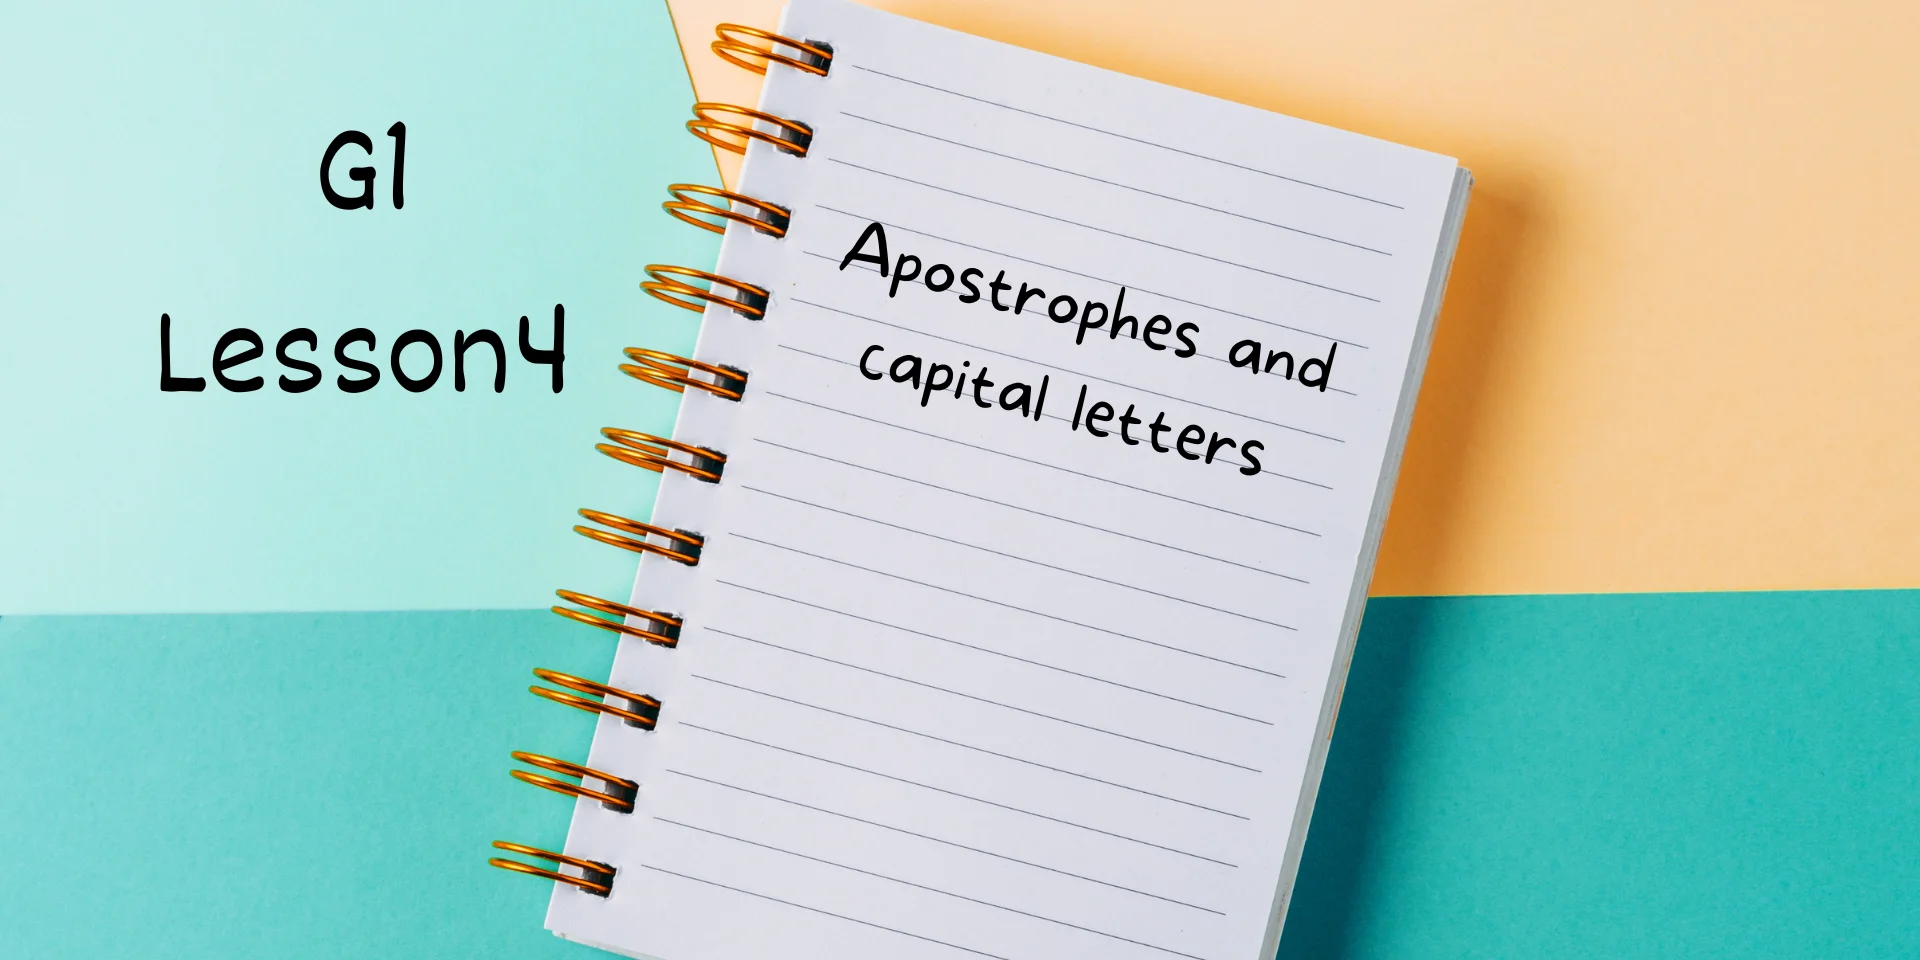 G1 Lesson 4 Apostrophes and capital letters